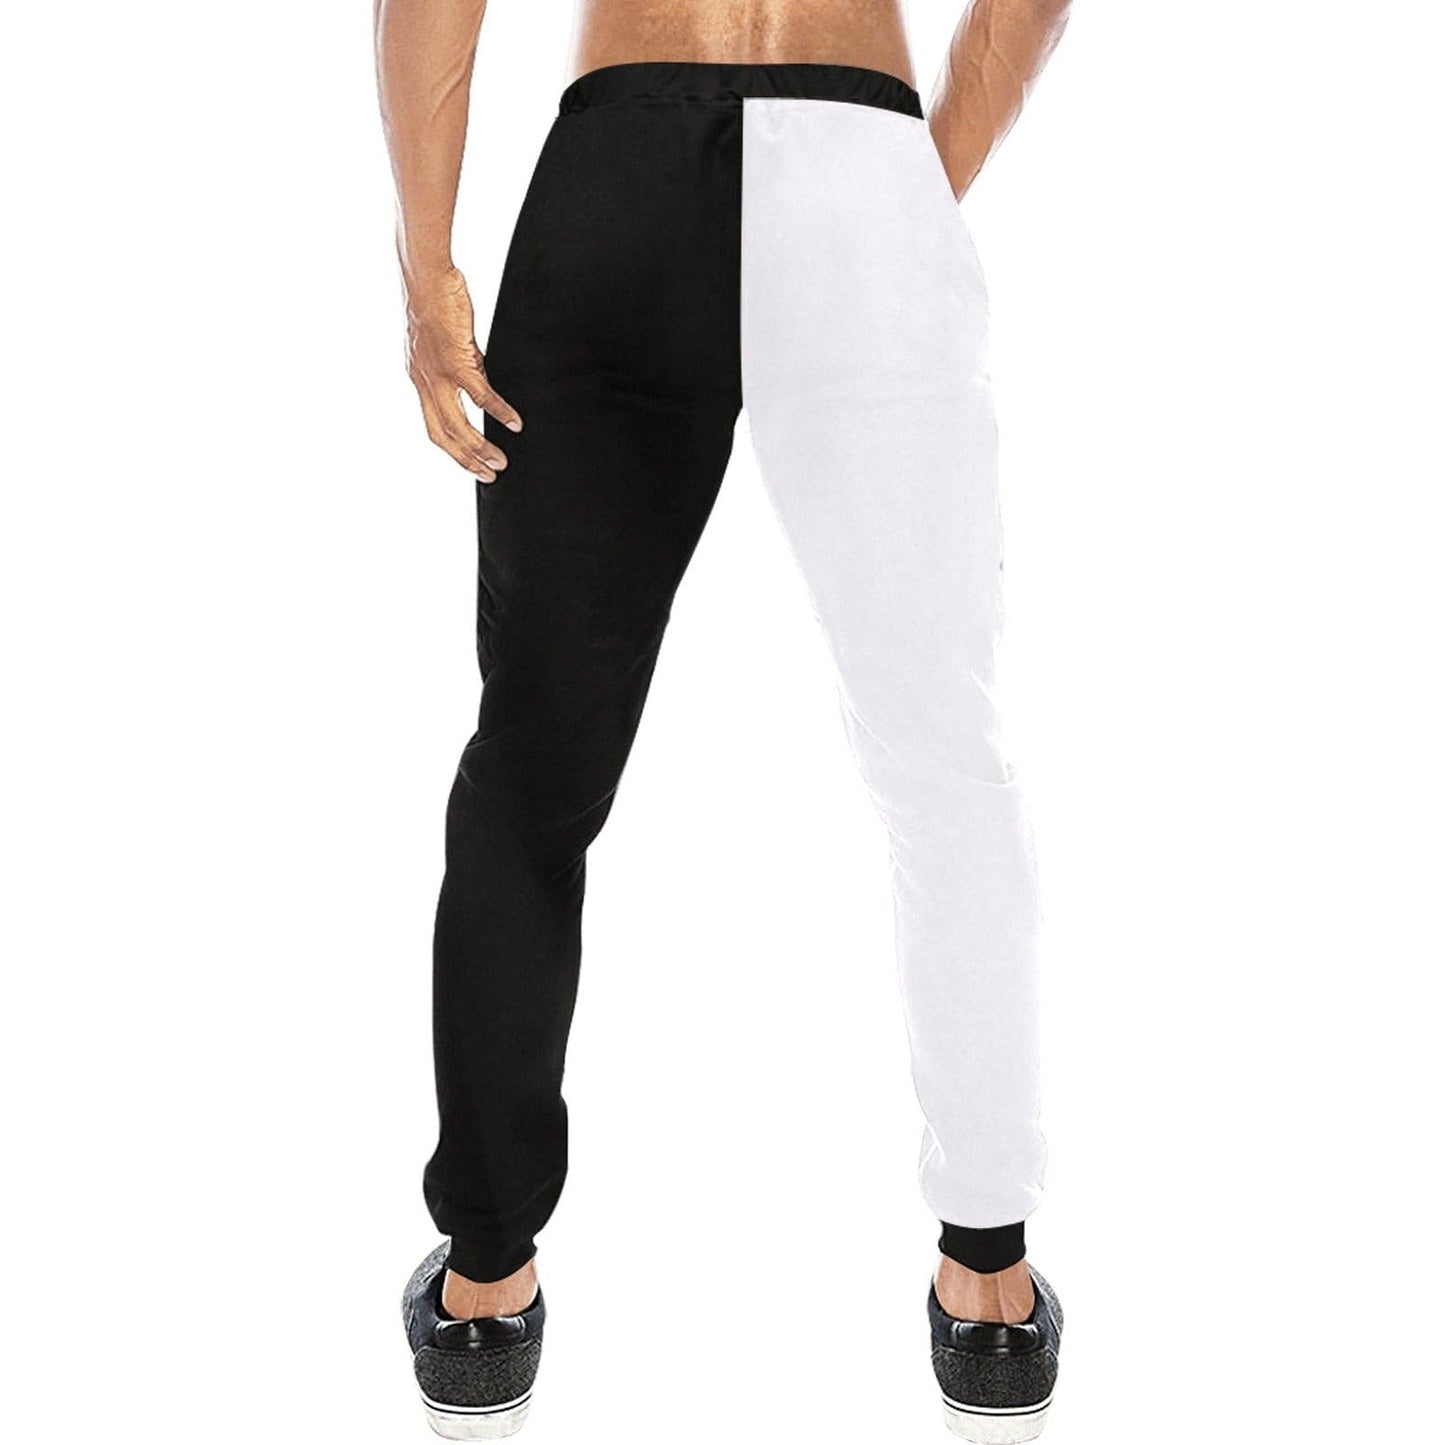 So Black and White Casual Lounge Pants